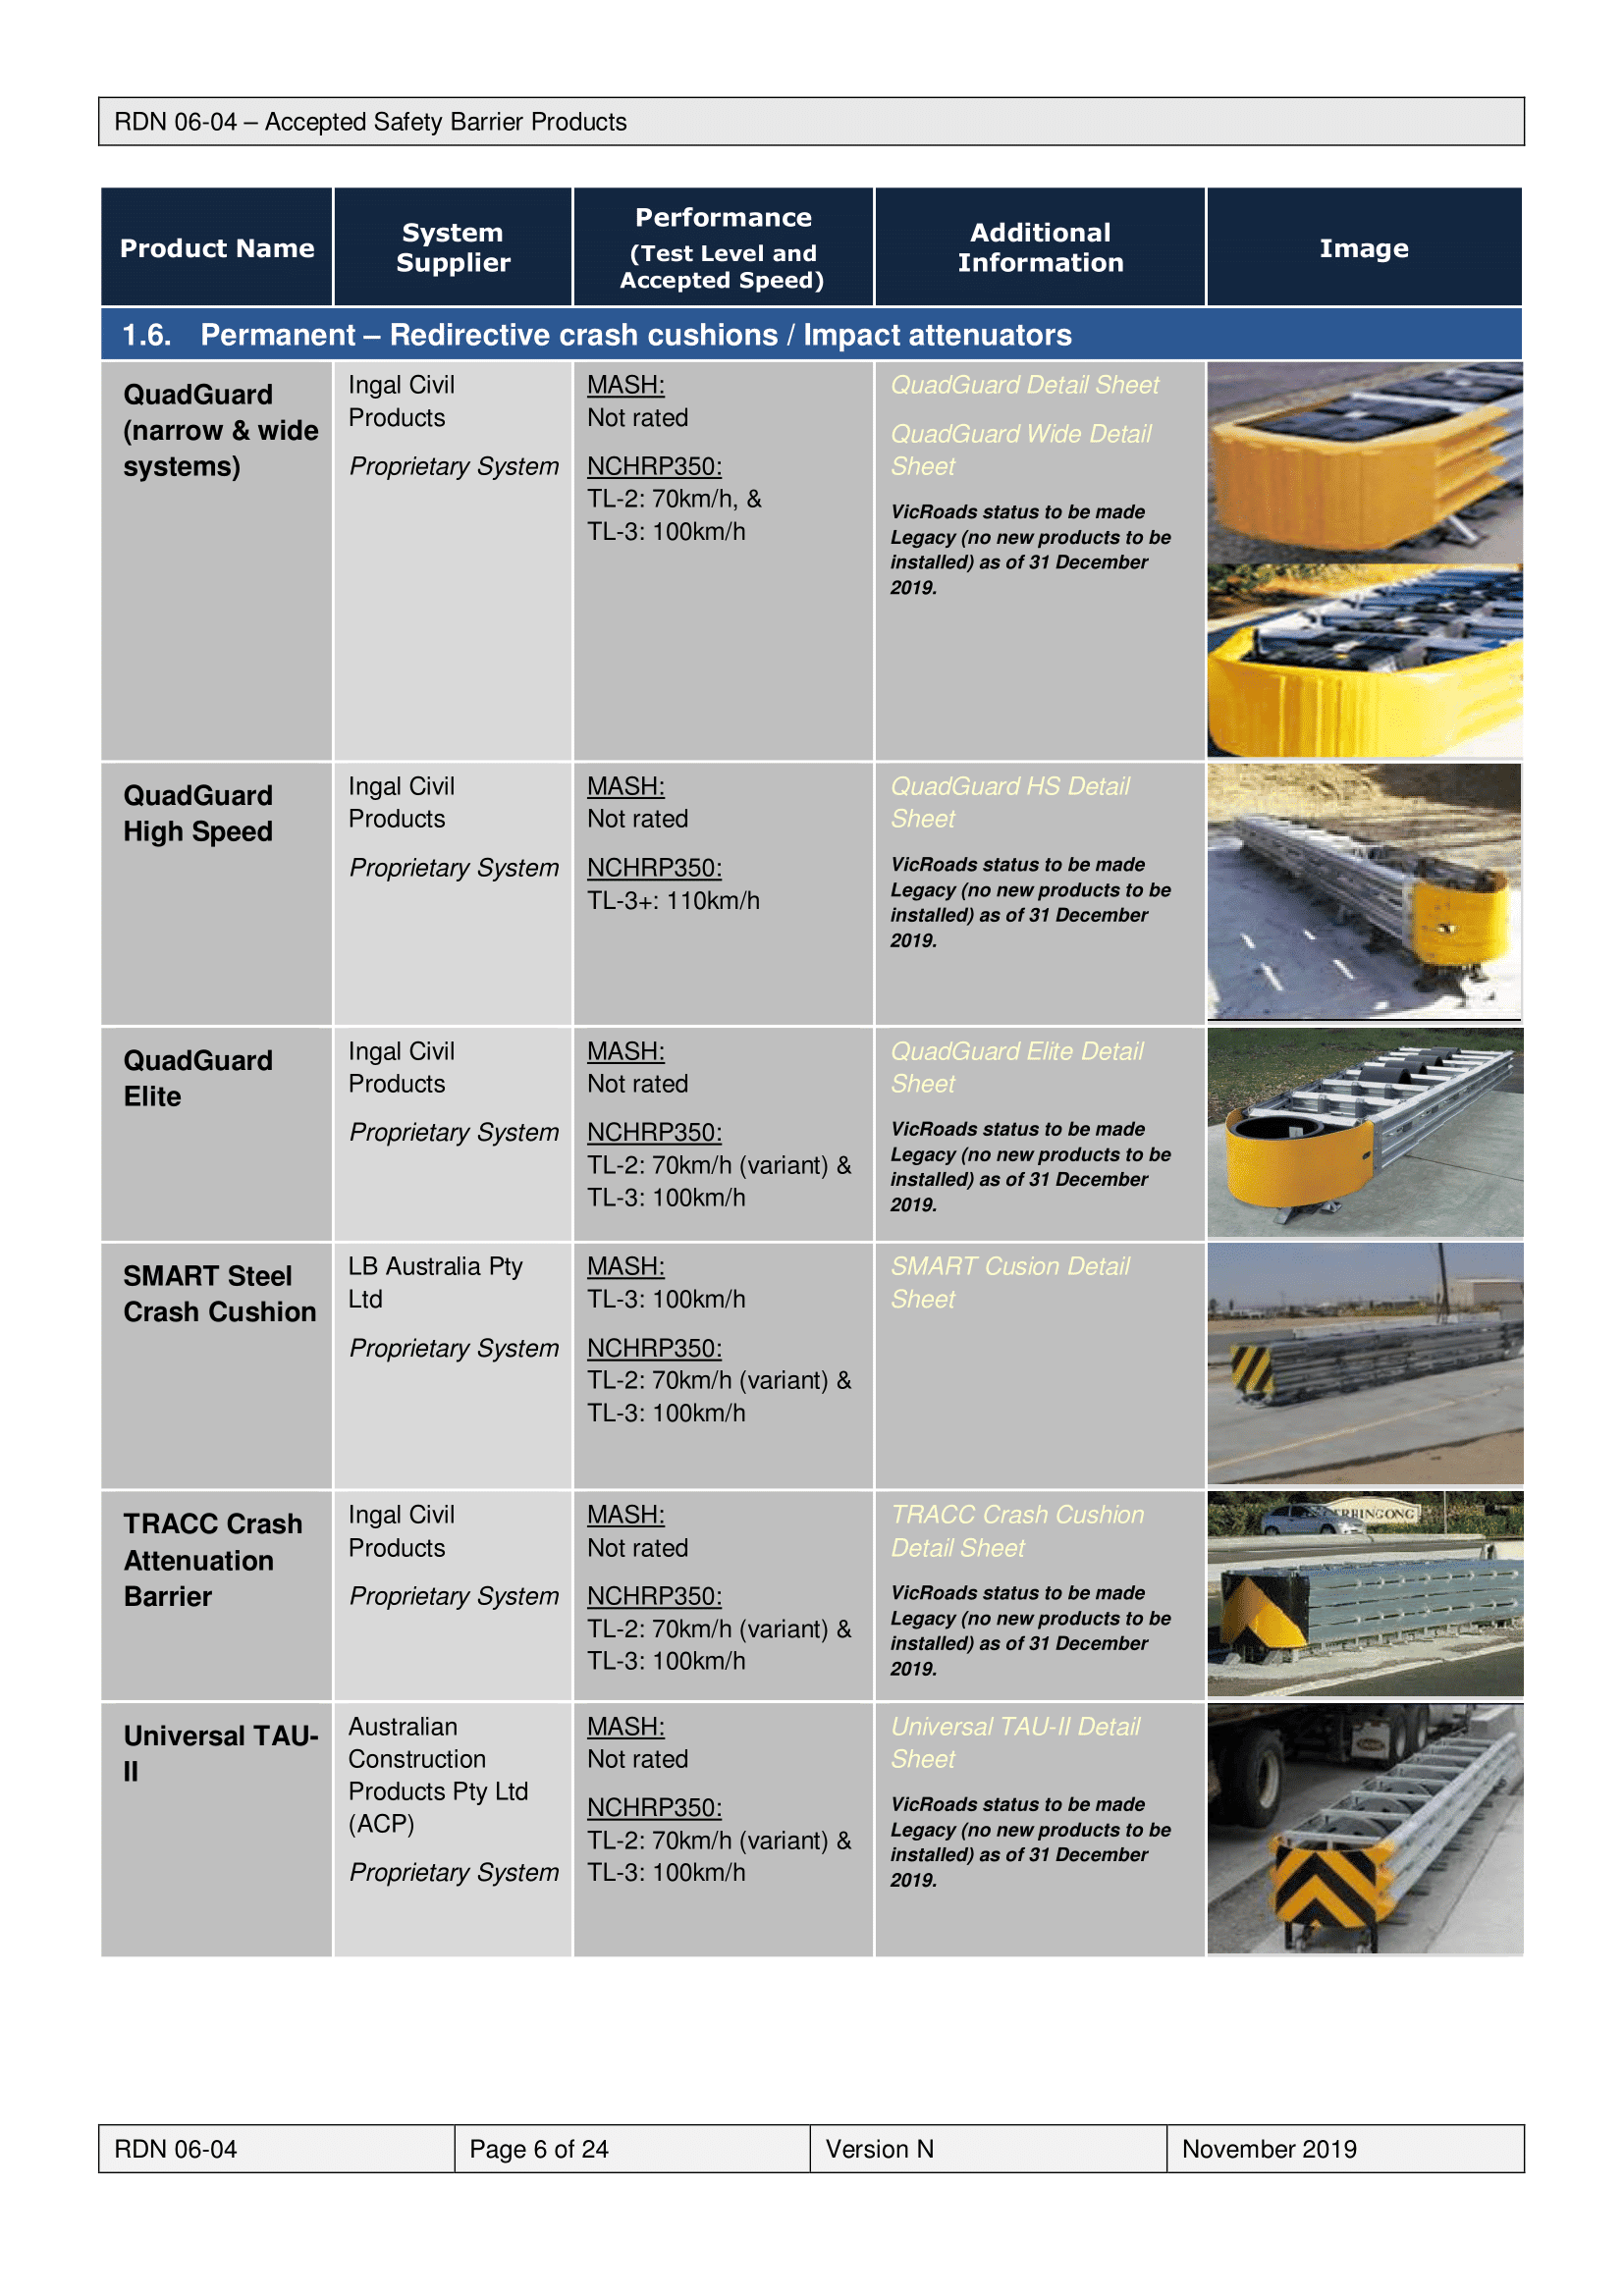 Road Design Note 0604 N Accepted Safety Barrier Products 11 2019-06